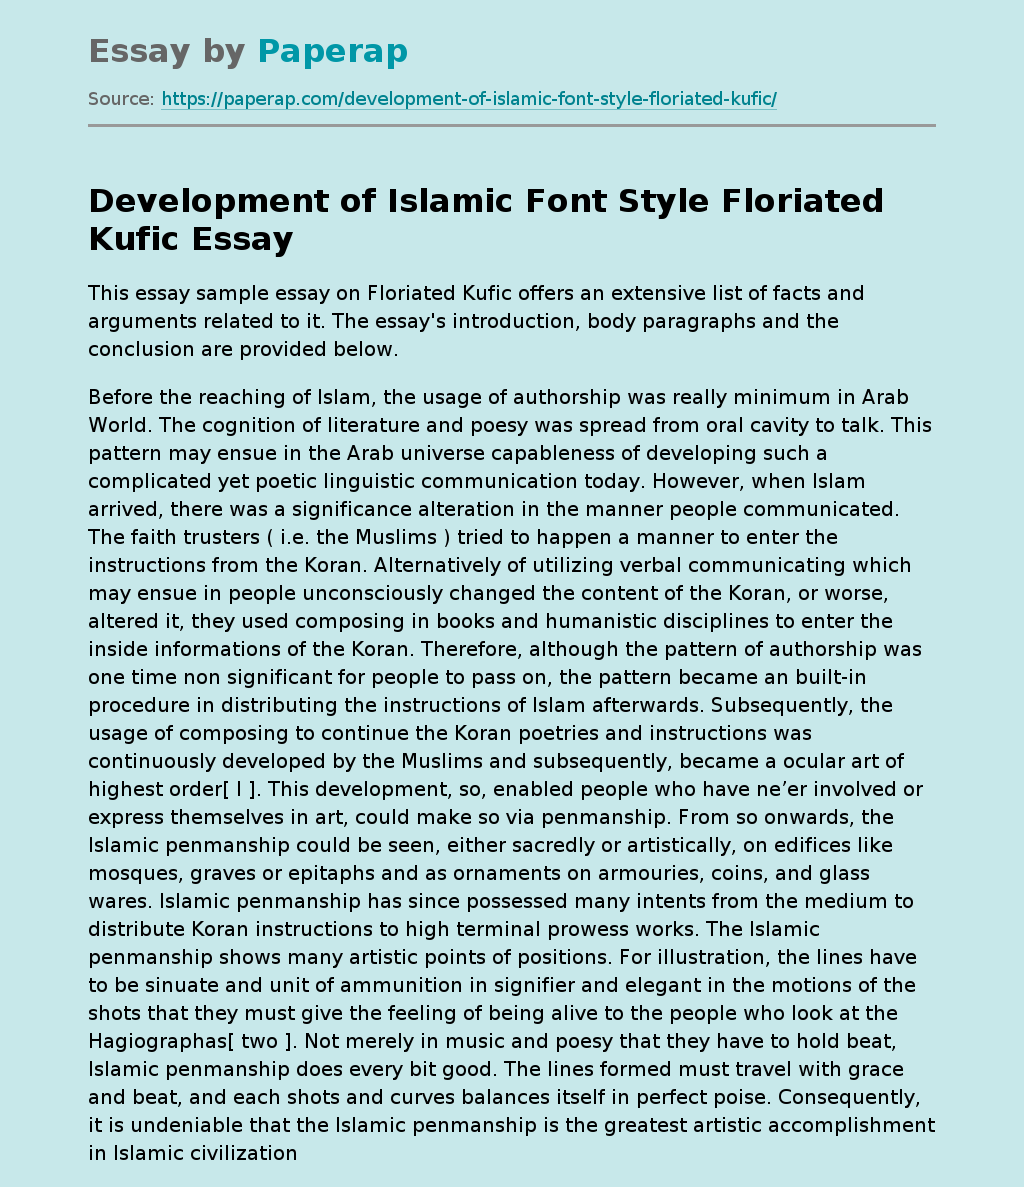 Development of Islamic Font Style Floriated Kufic